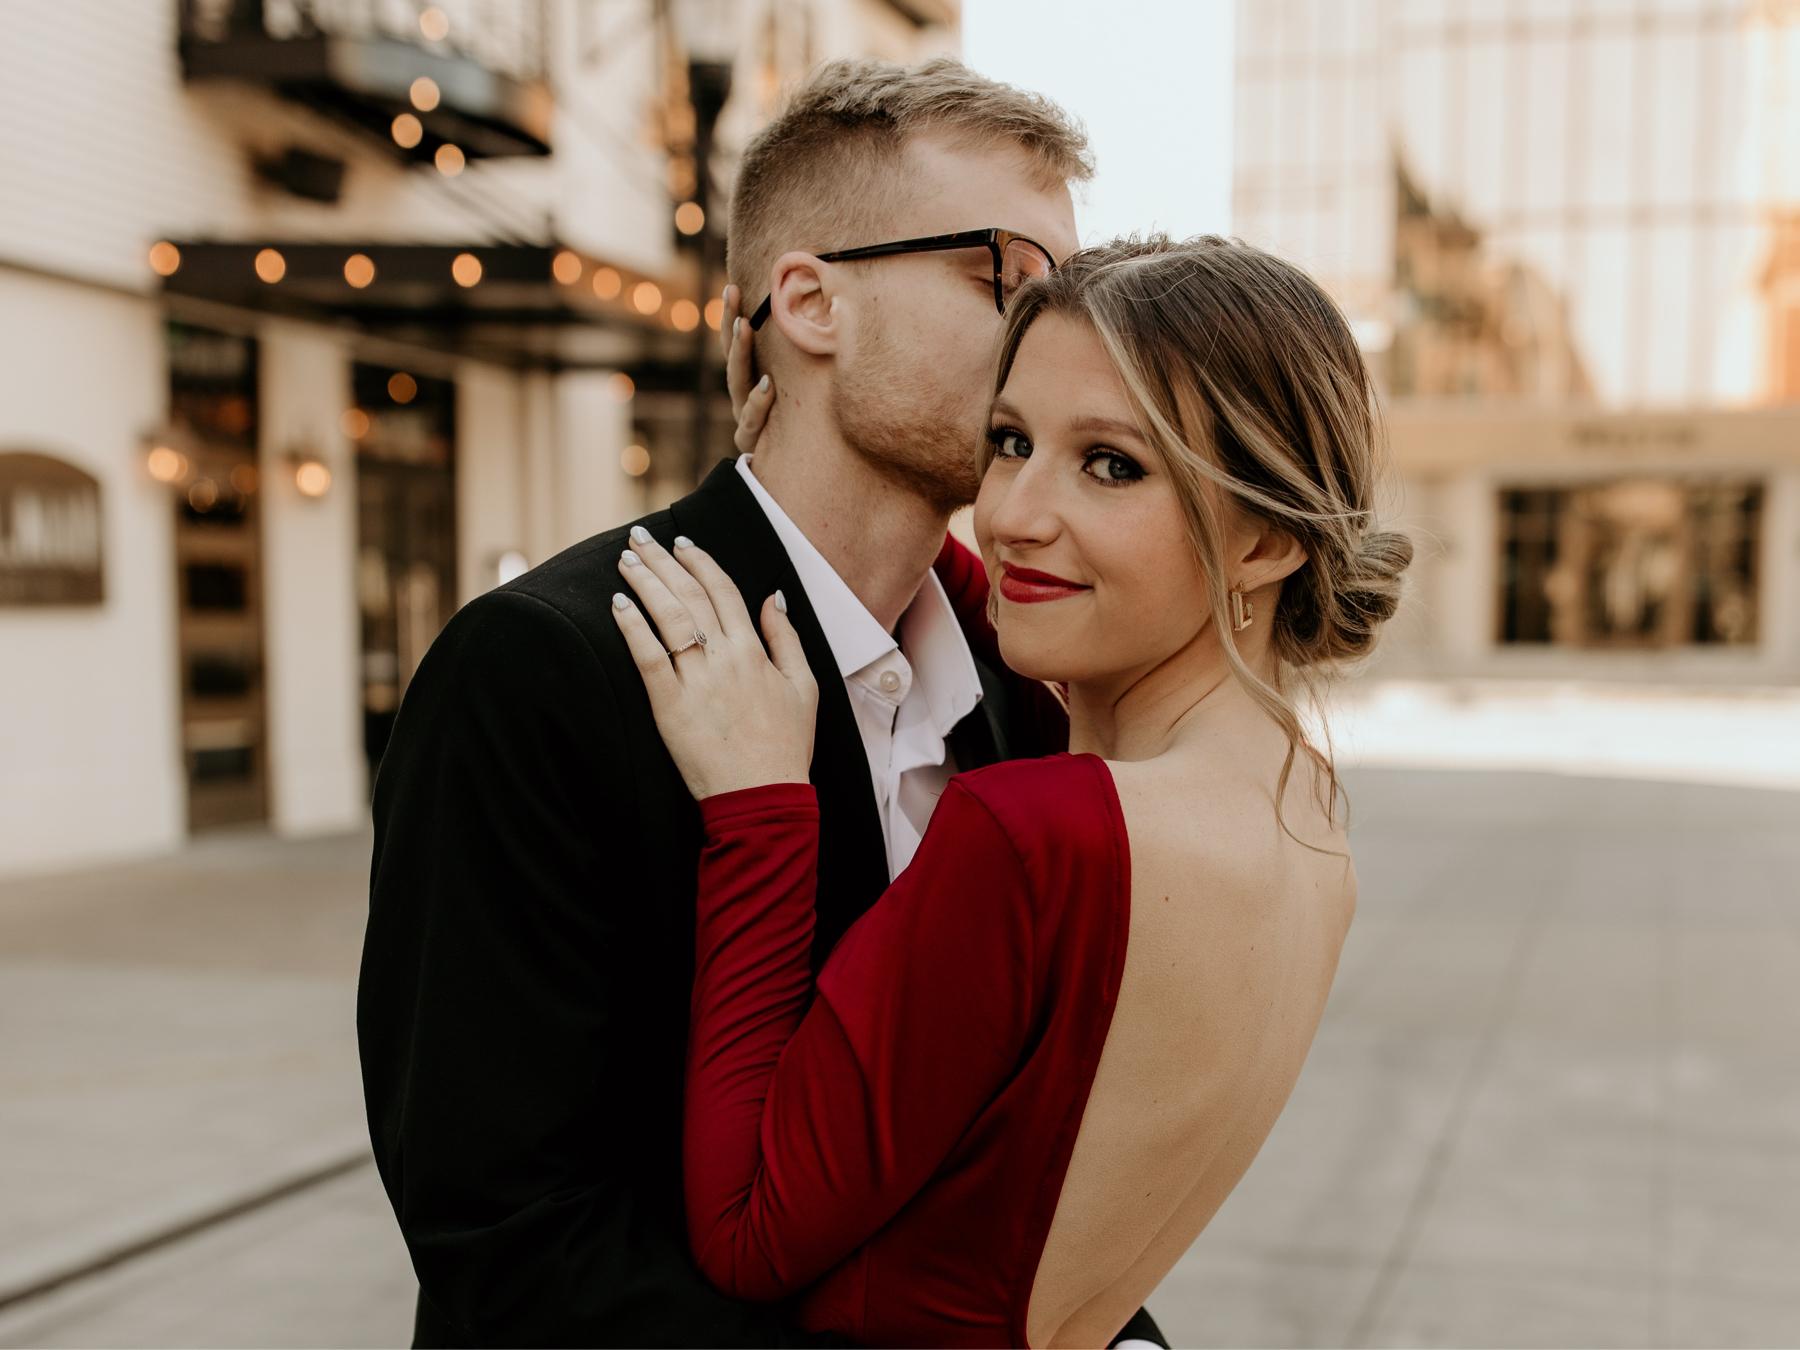 The Wedding Website of Kailee patterson and Logan silvers